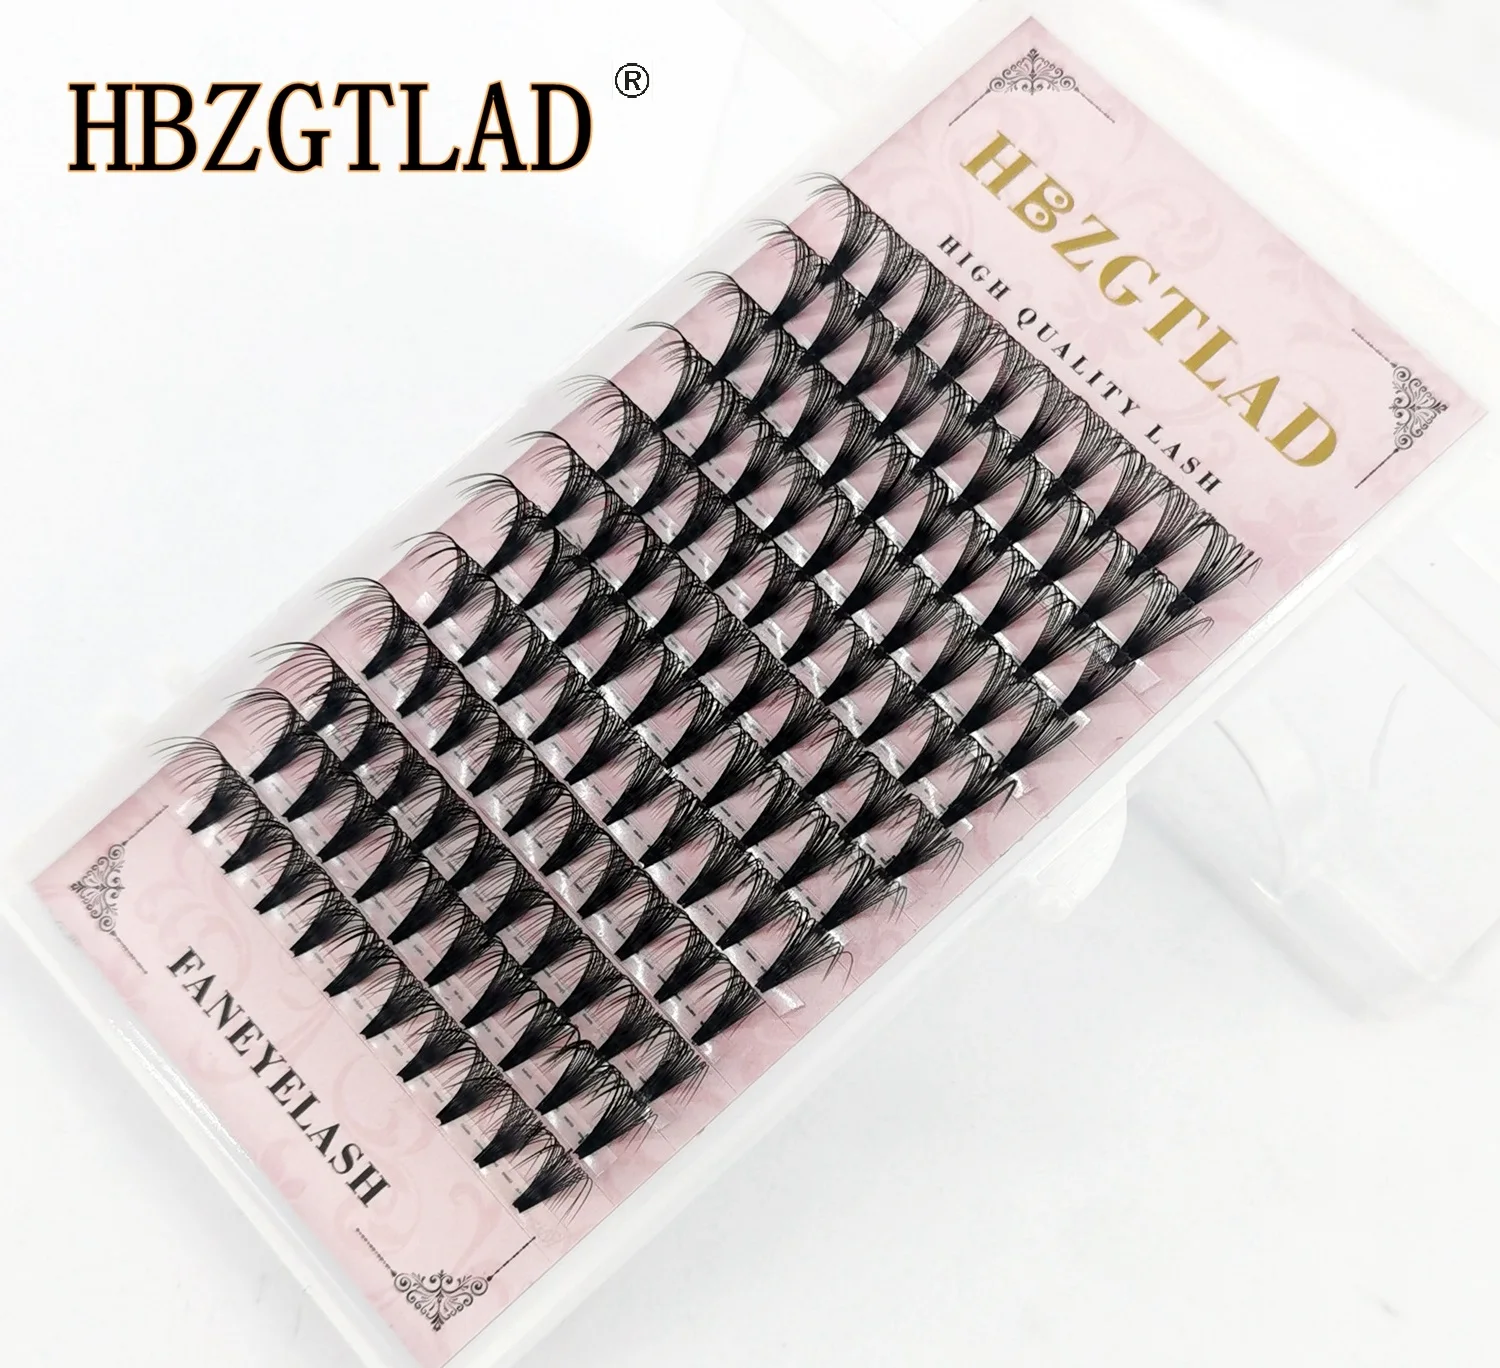 

Wholesale Price 12/16 Lines High Quality 20D Eyelash Extensions 100% Handmade Synthetic Hair Russian Volume Lashes Premade Fans